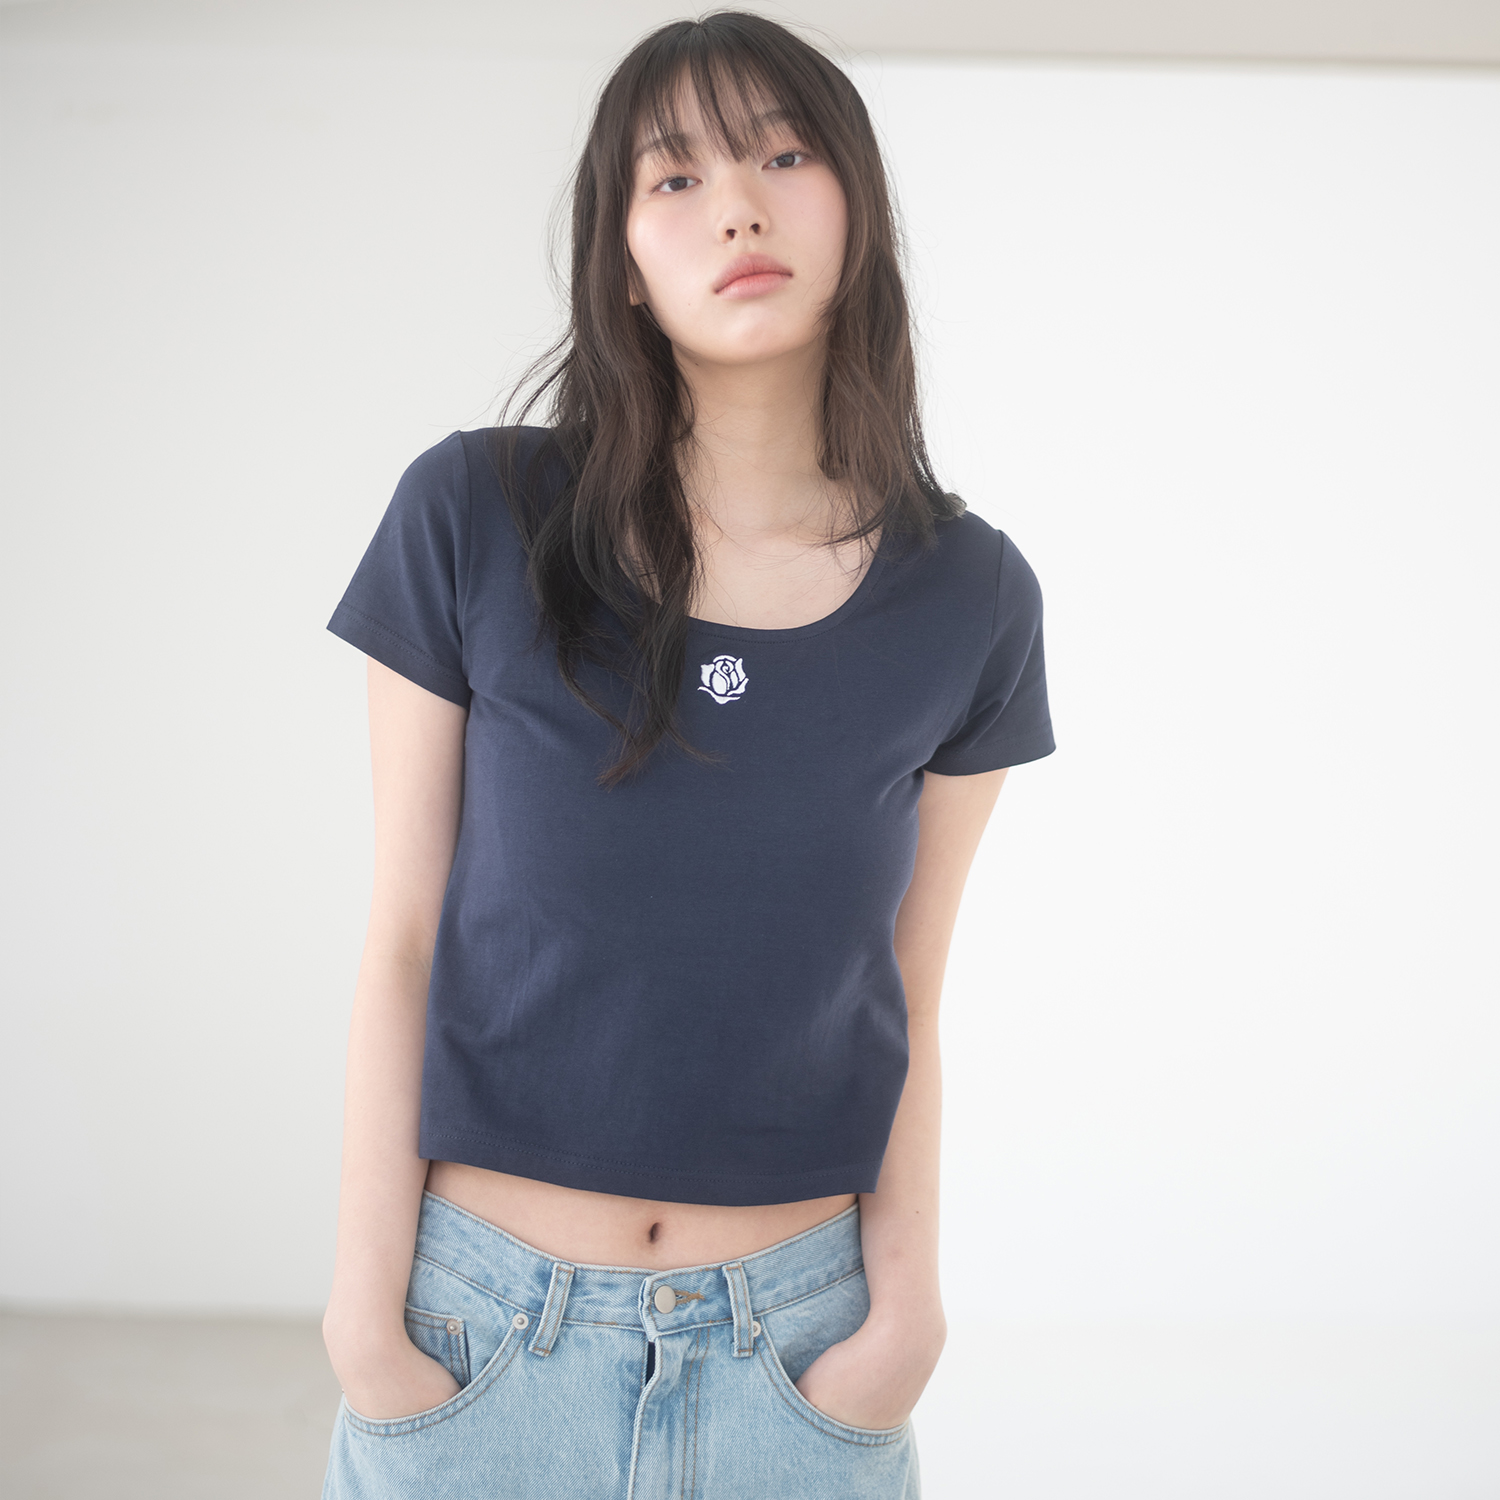 ROSE SQUARE NECK S/S TEE(NAVY)